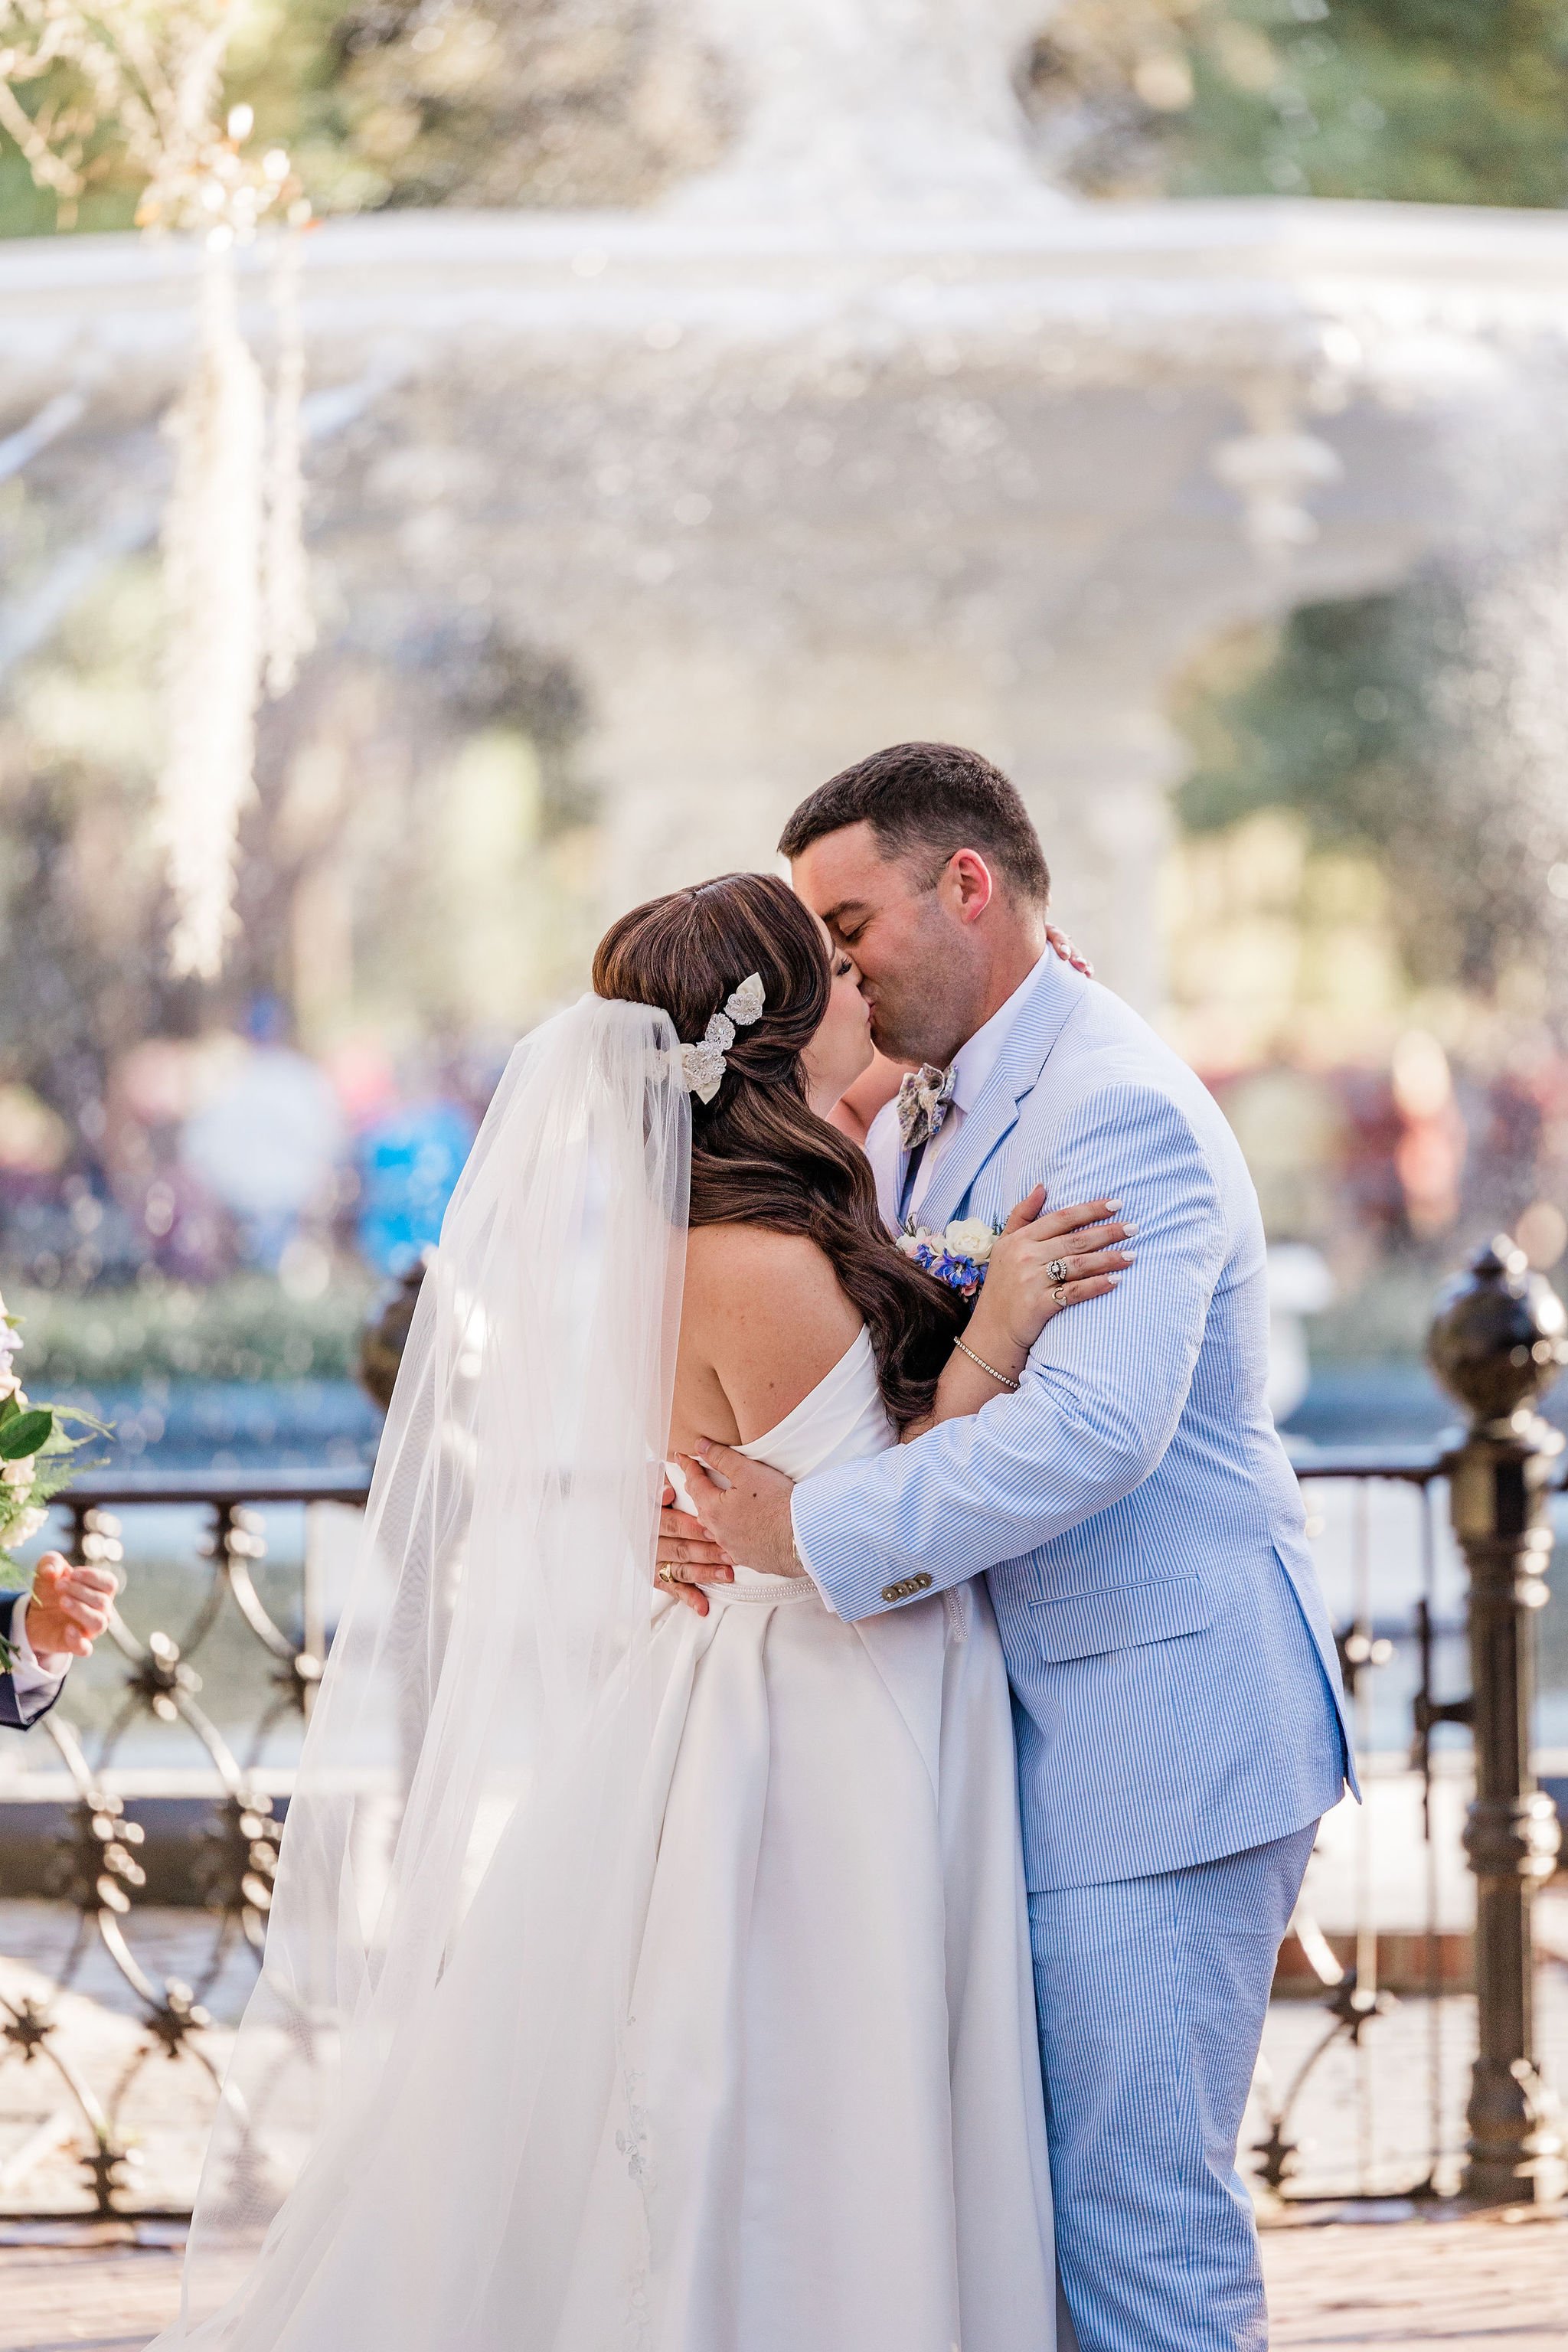 Victoria-and-stuarts-pastel-spring-wedding-at-the-forsyth-park-fountain-and-the-mansion-on-forsyth-in-savannah-georgia-planned-by-savannah-wedding-planner-and-savannah-wedding-florist-ivory-and-beau-15.JPG